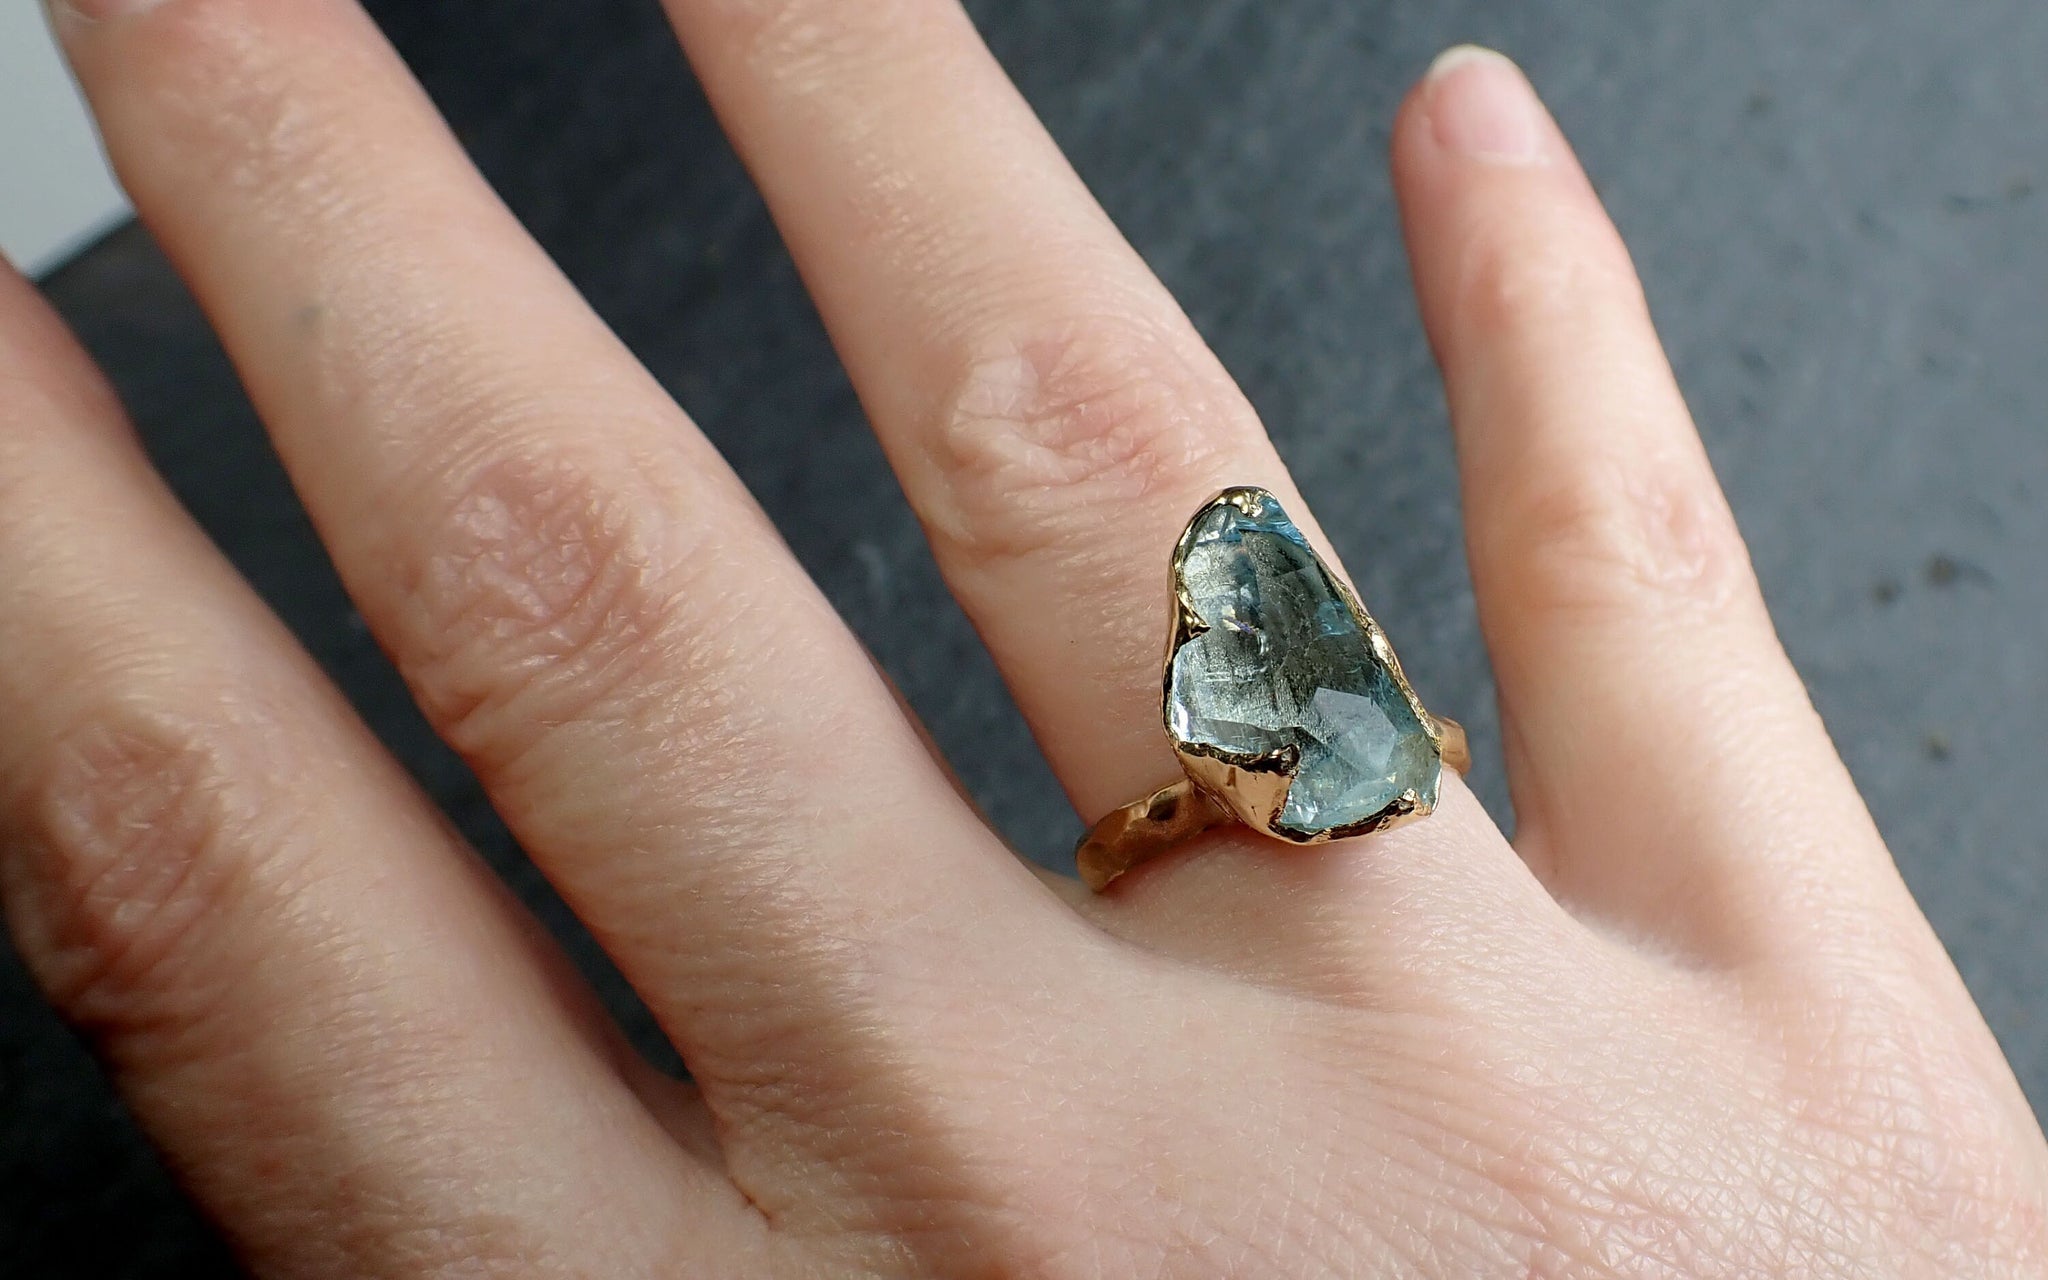 Partially faceted Aquamarine Solitaire Ring 14k gold Custom One Of a Kind Gemstone Ring Bespoke byAngeline 3216